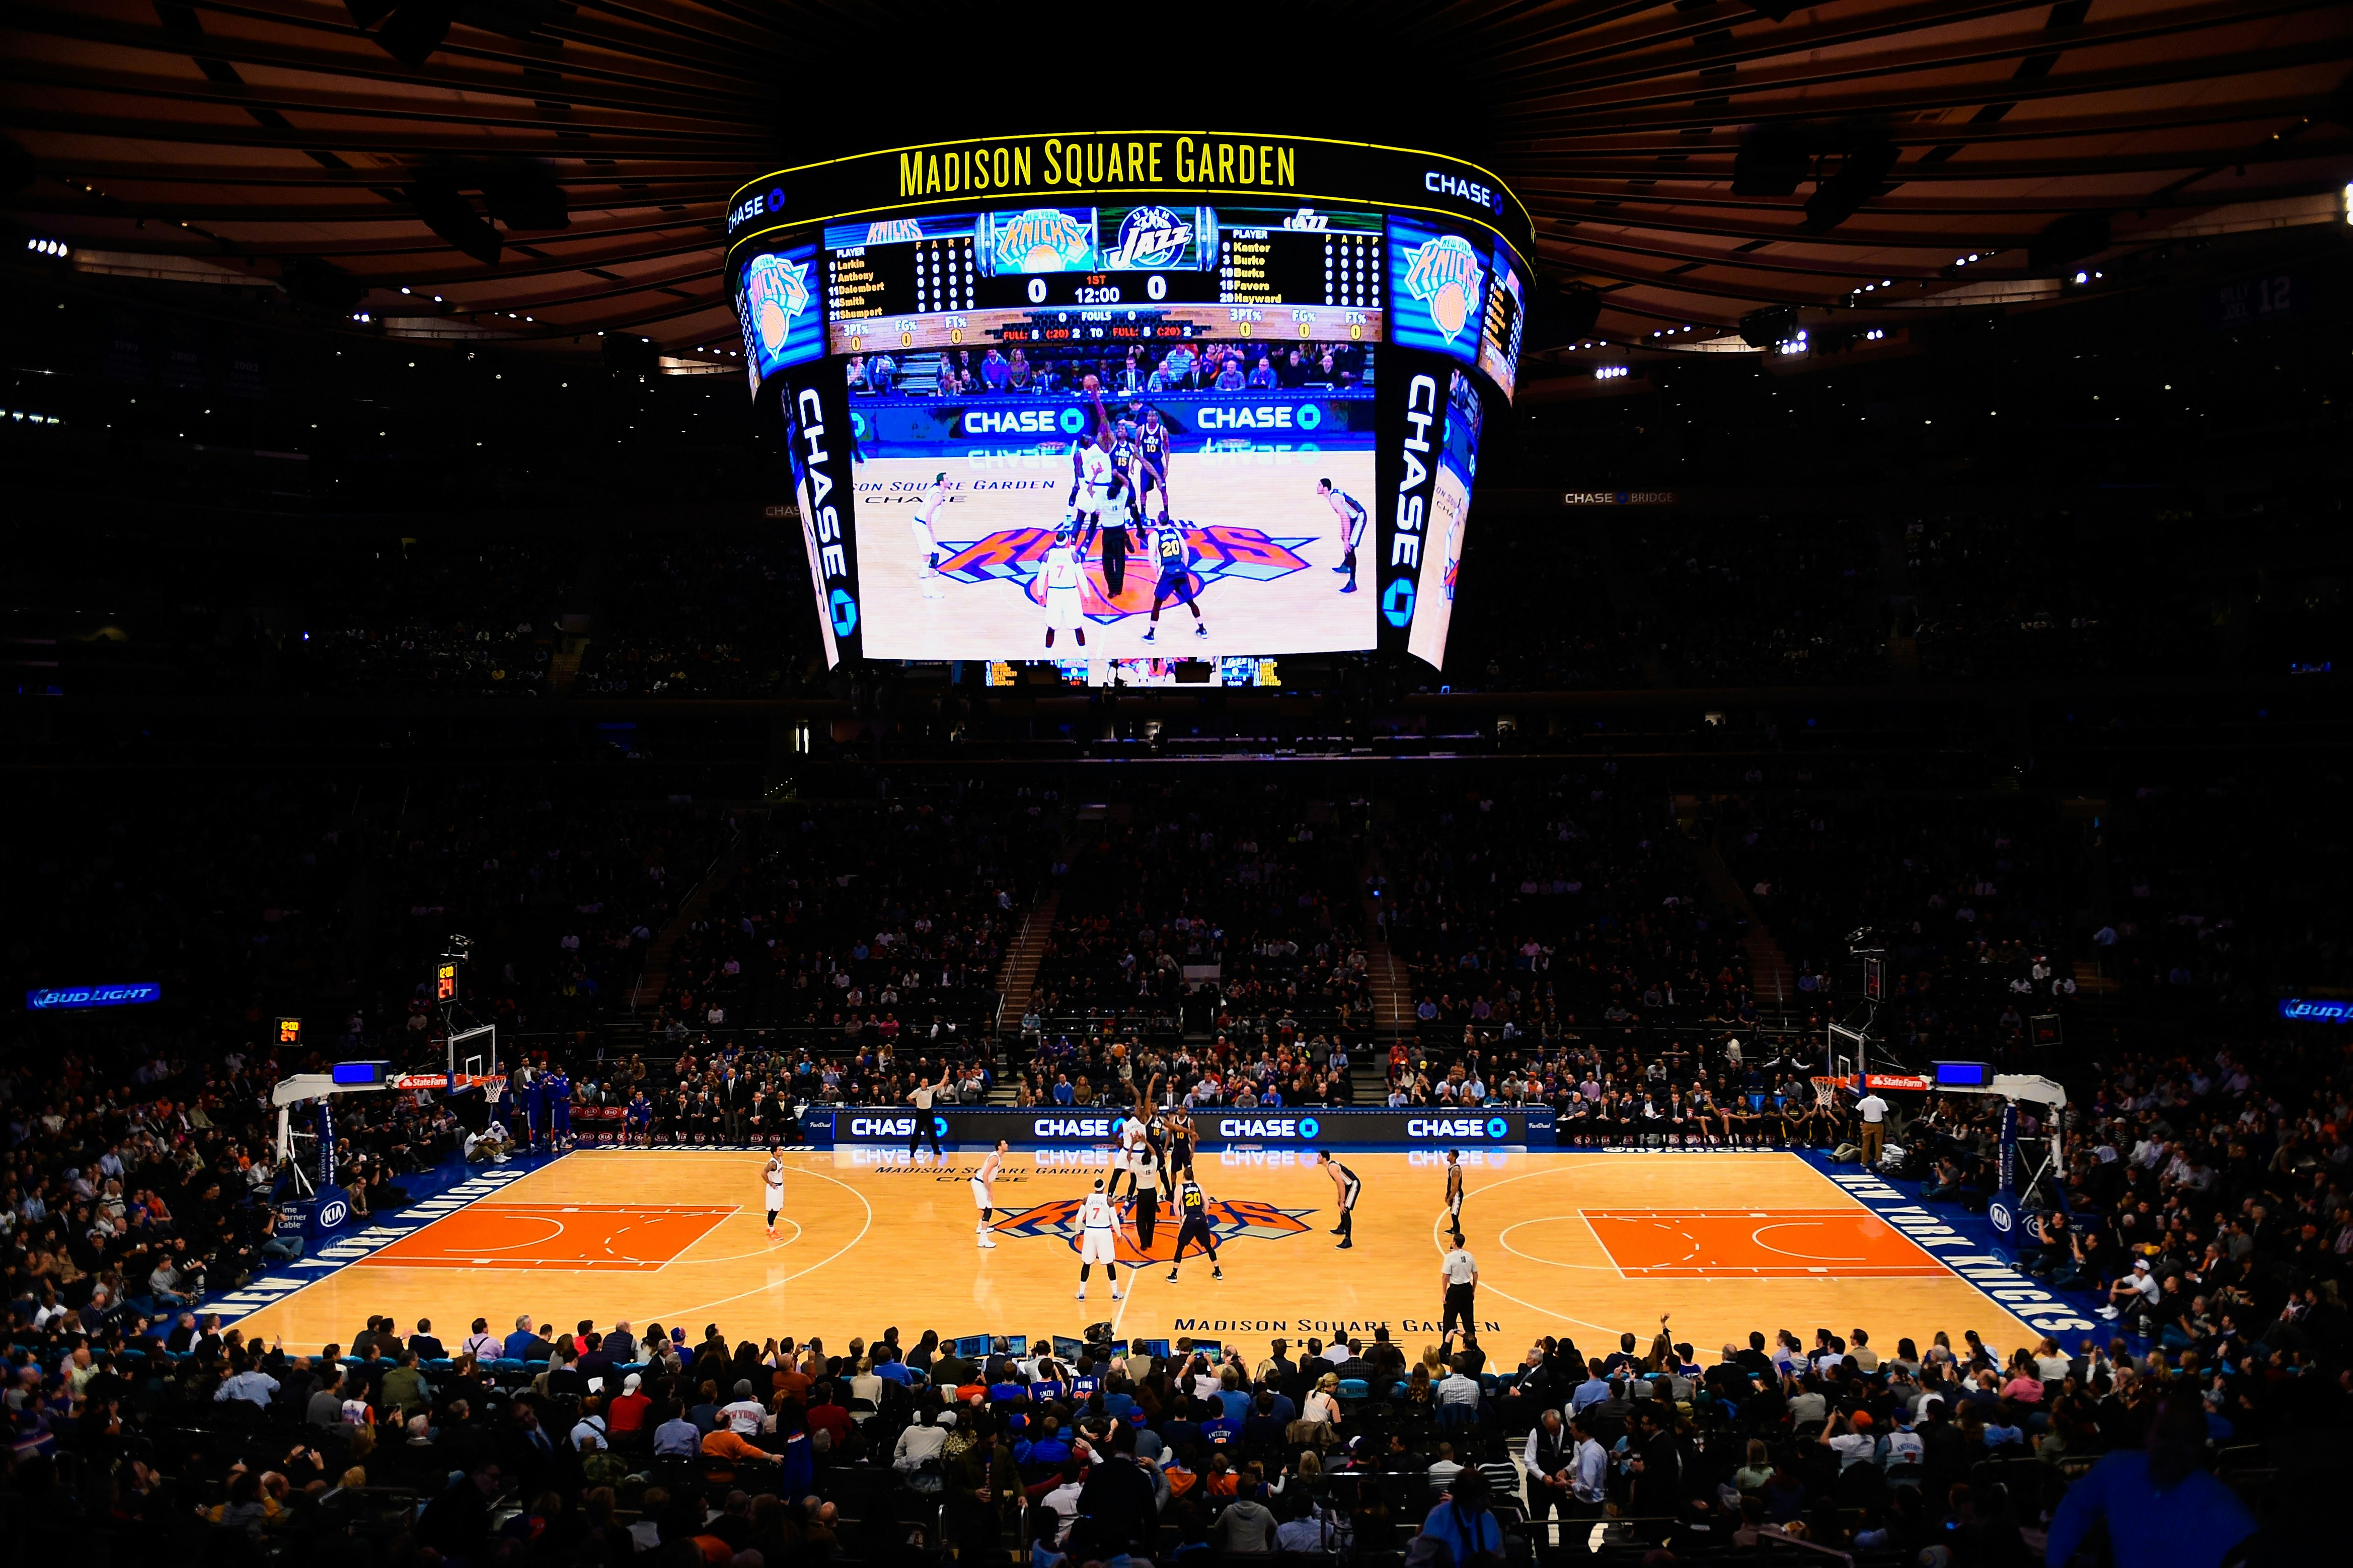 Sports fans watch a basketball game at Madison Square Garden in New York City.